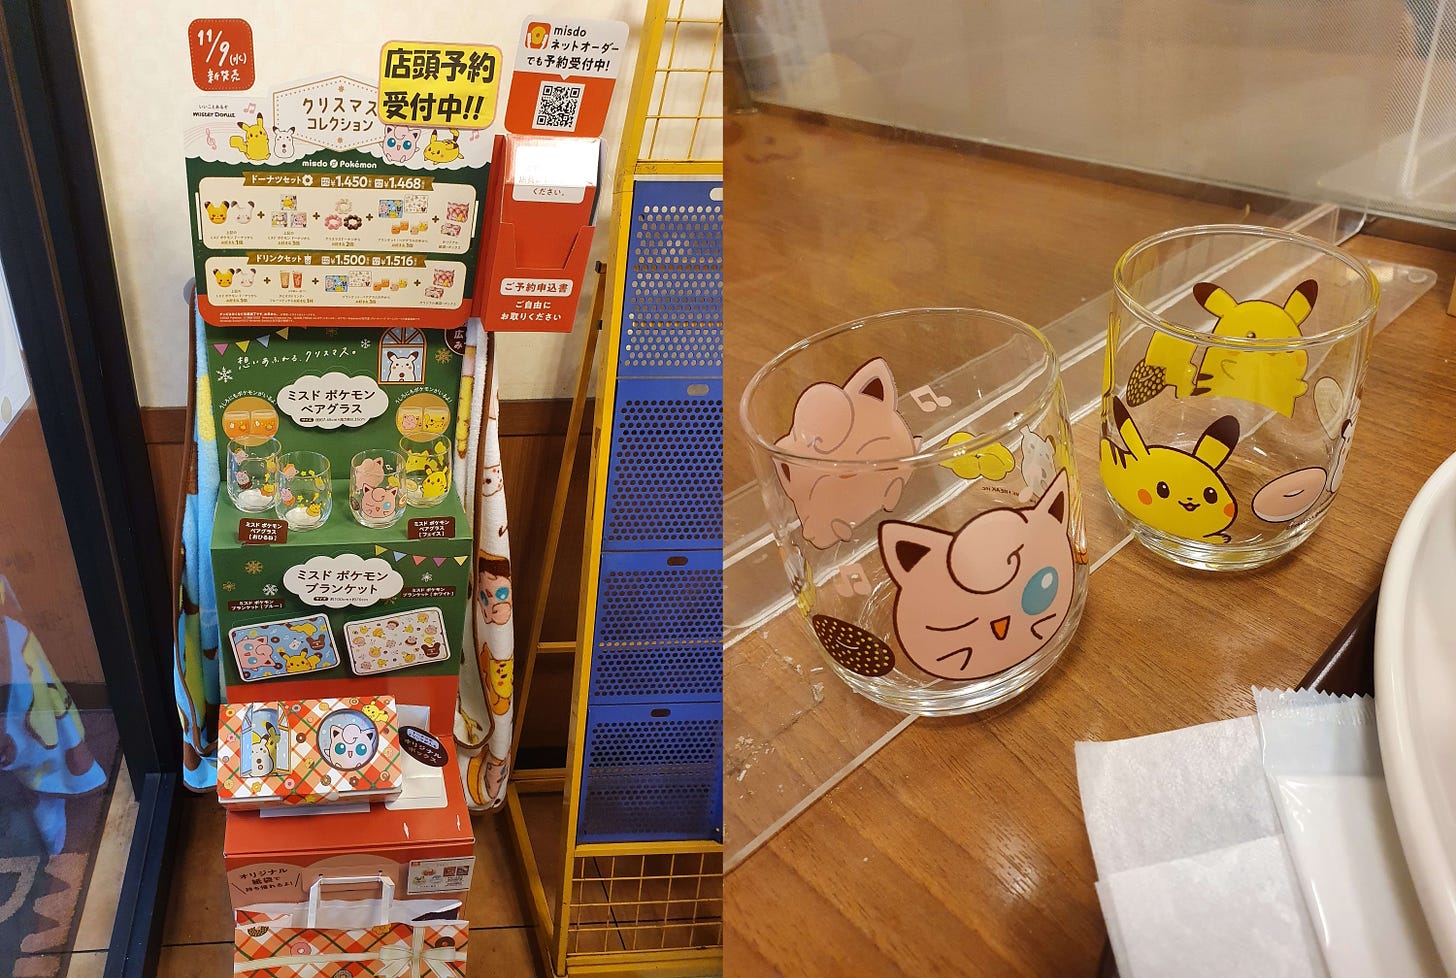 Some awesome looking Pokémon themed glasses featuring Pikachu and Jigglypuff, available from Mister Donut